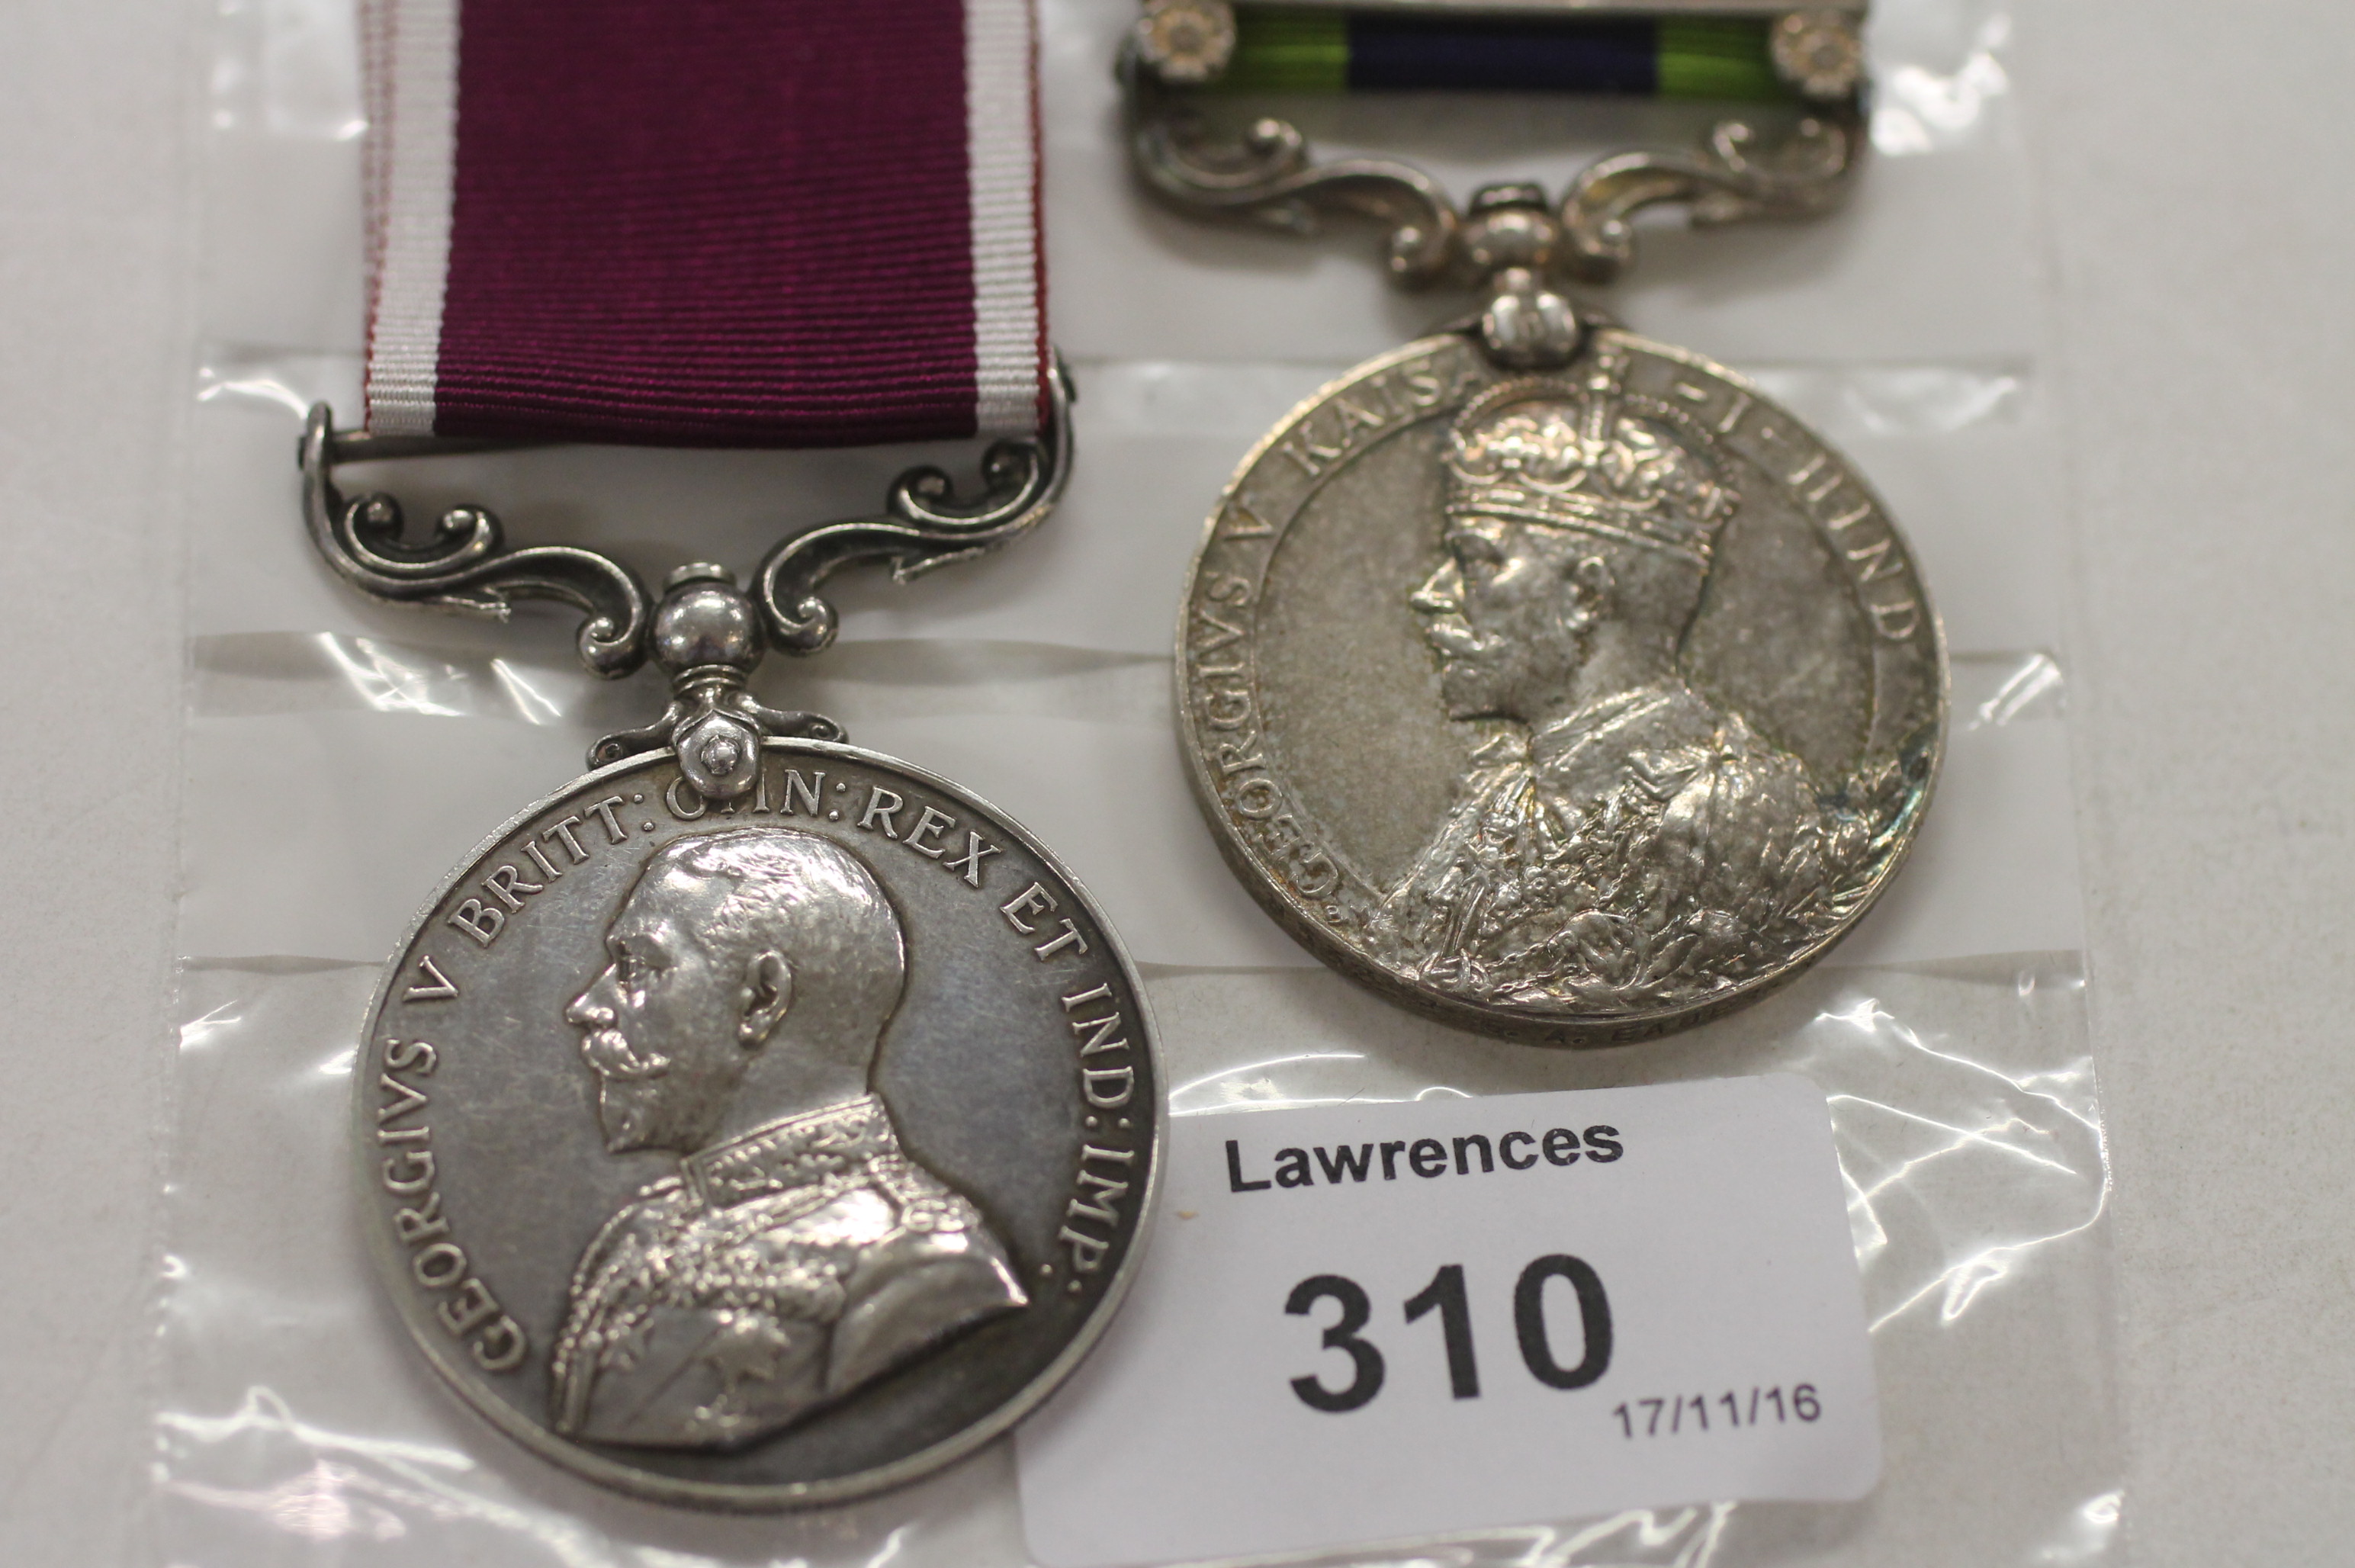 A SOMERSET LI IGS & AN UNRELATED RE LSGC MEDAL. An Idia General Service Medal 1908 issue with bar